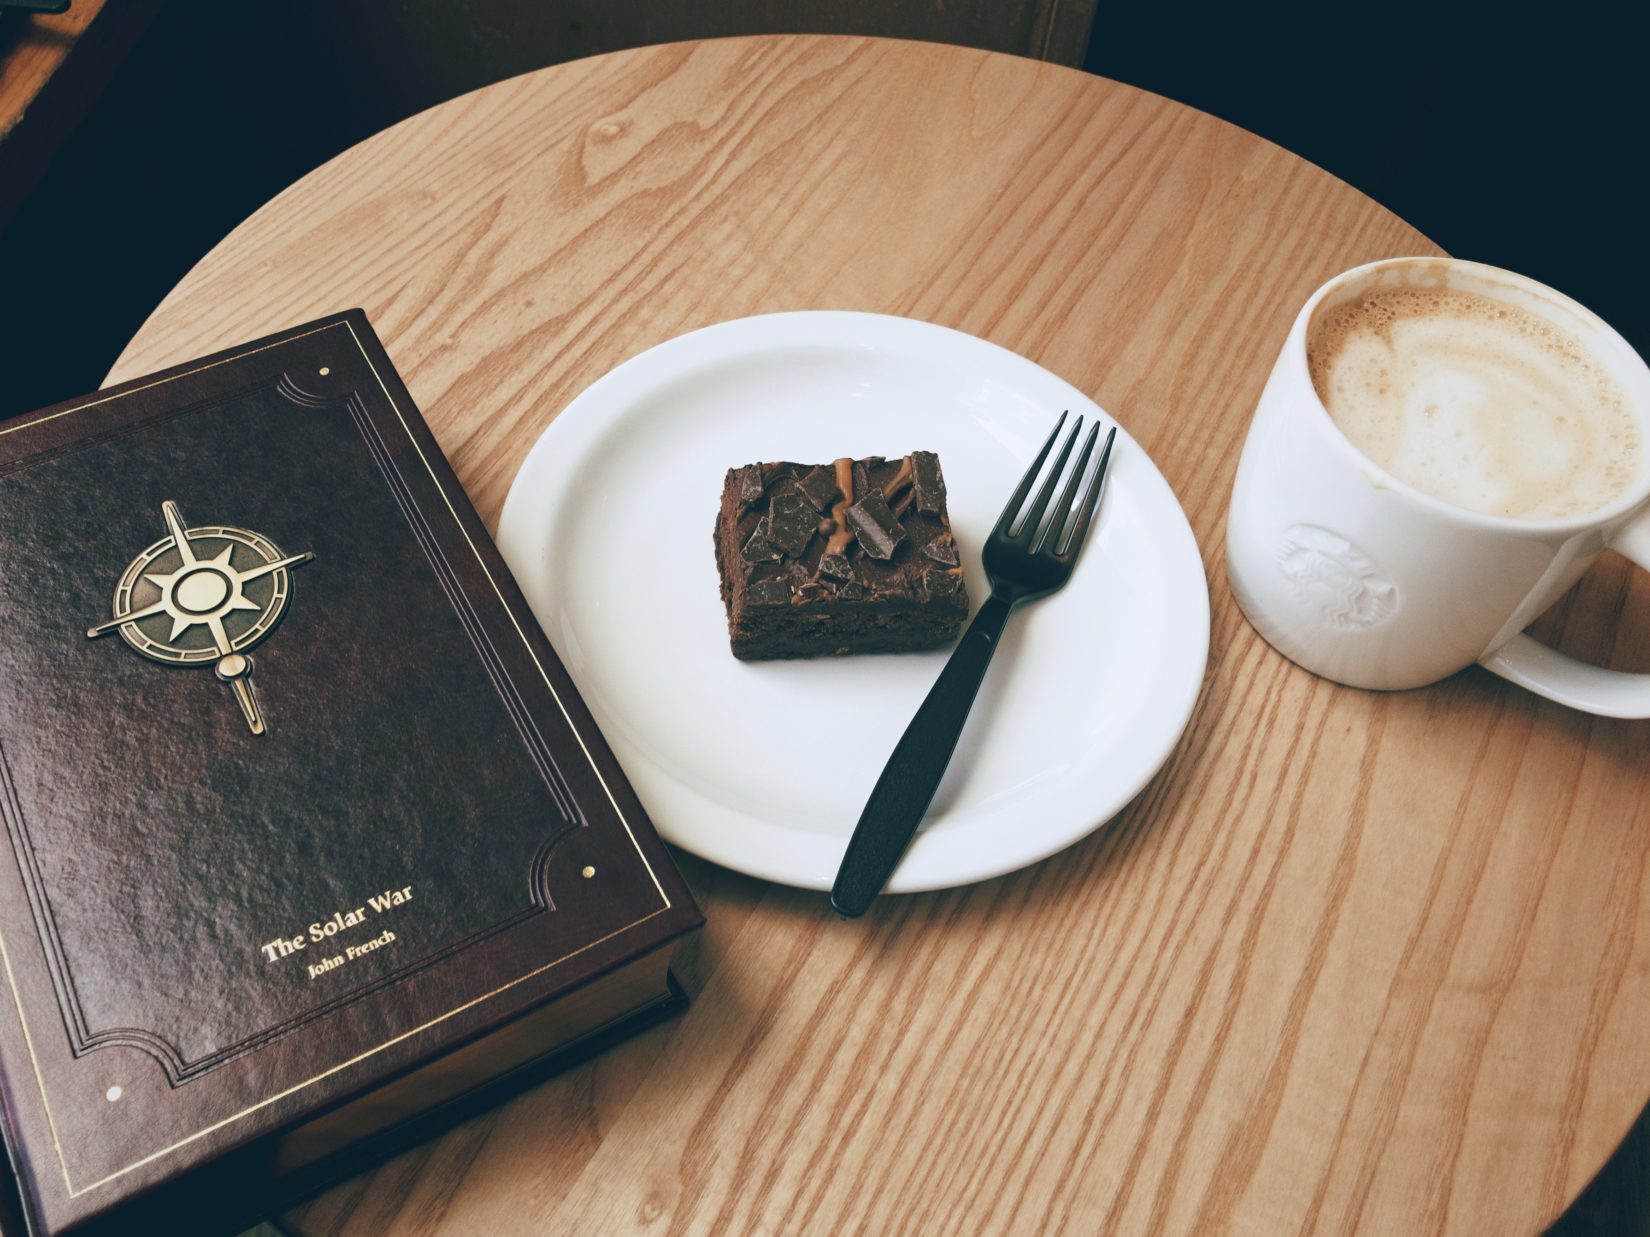 Book, caramel brownie, and latté, on a coffee table